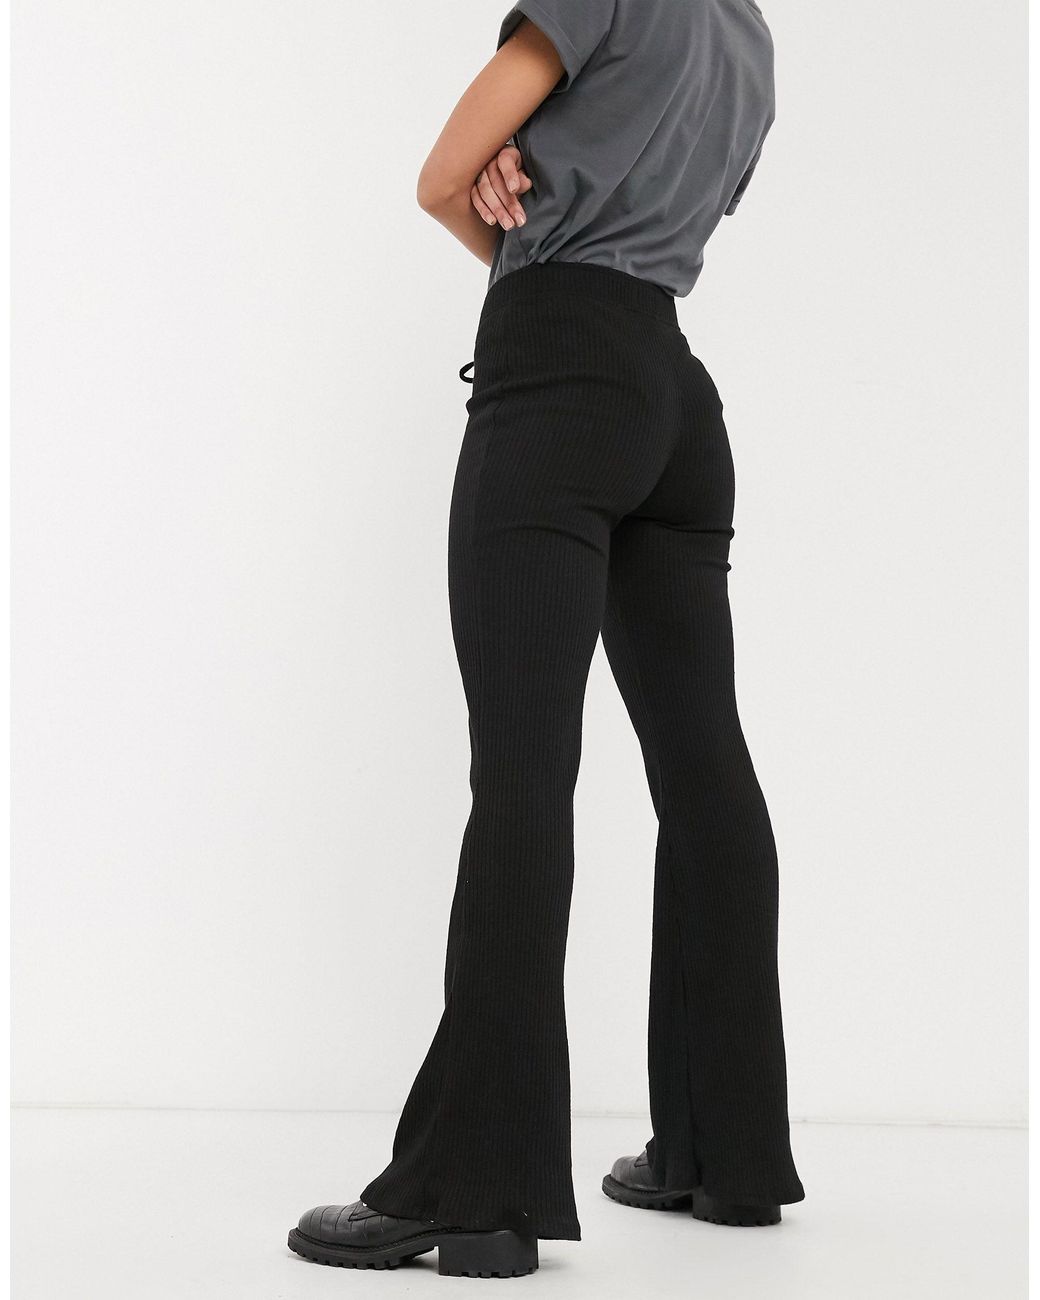 Bershka Ribbed Flared Pants With Tie Up Detail in Black | Lyst UK